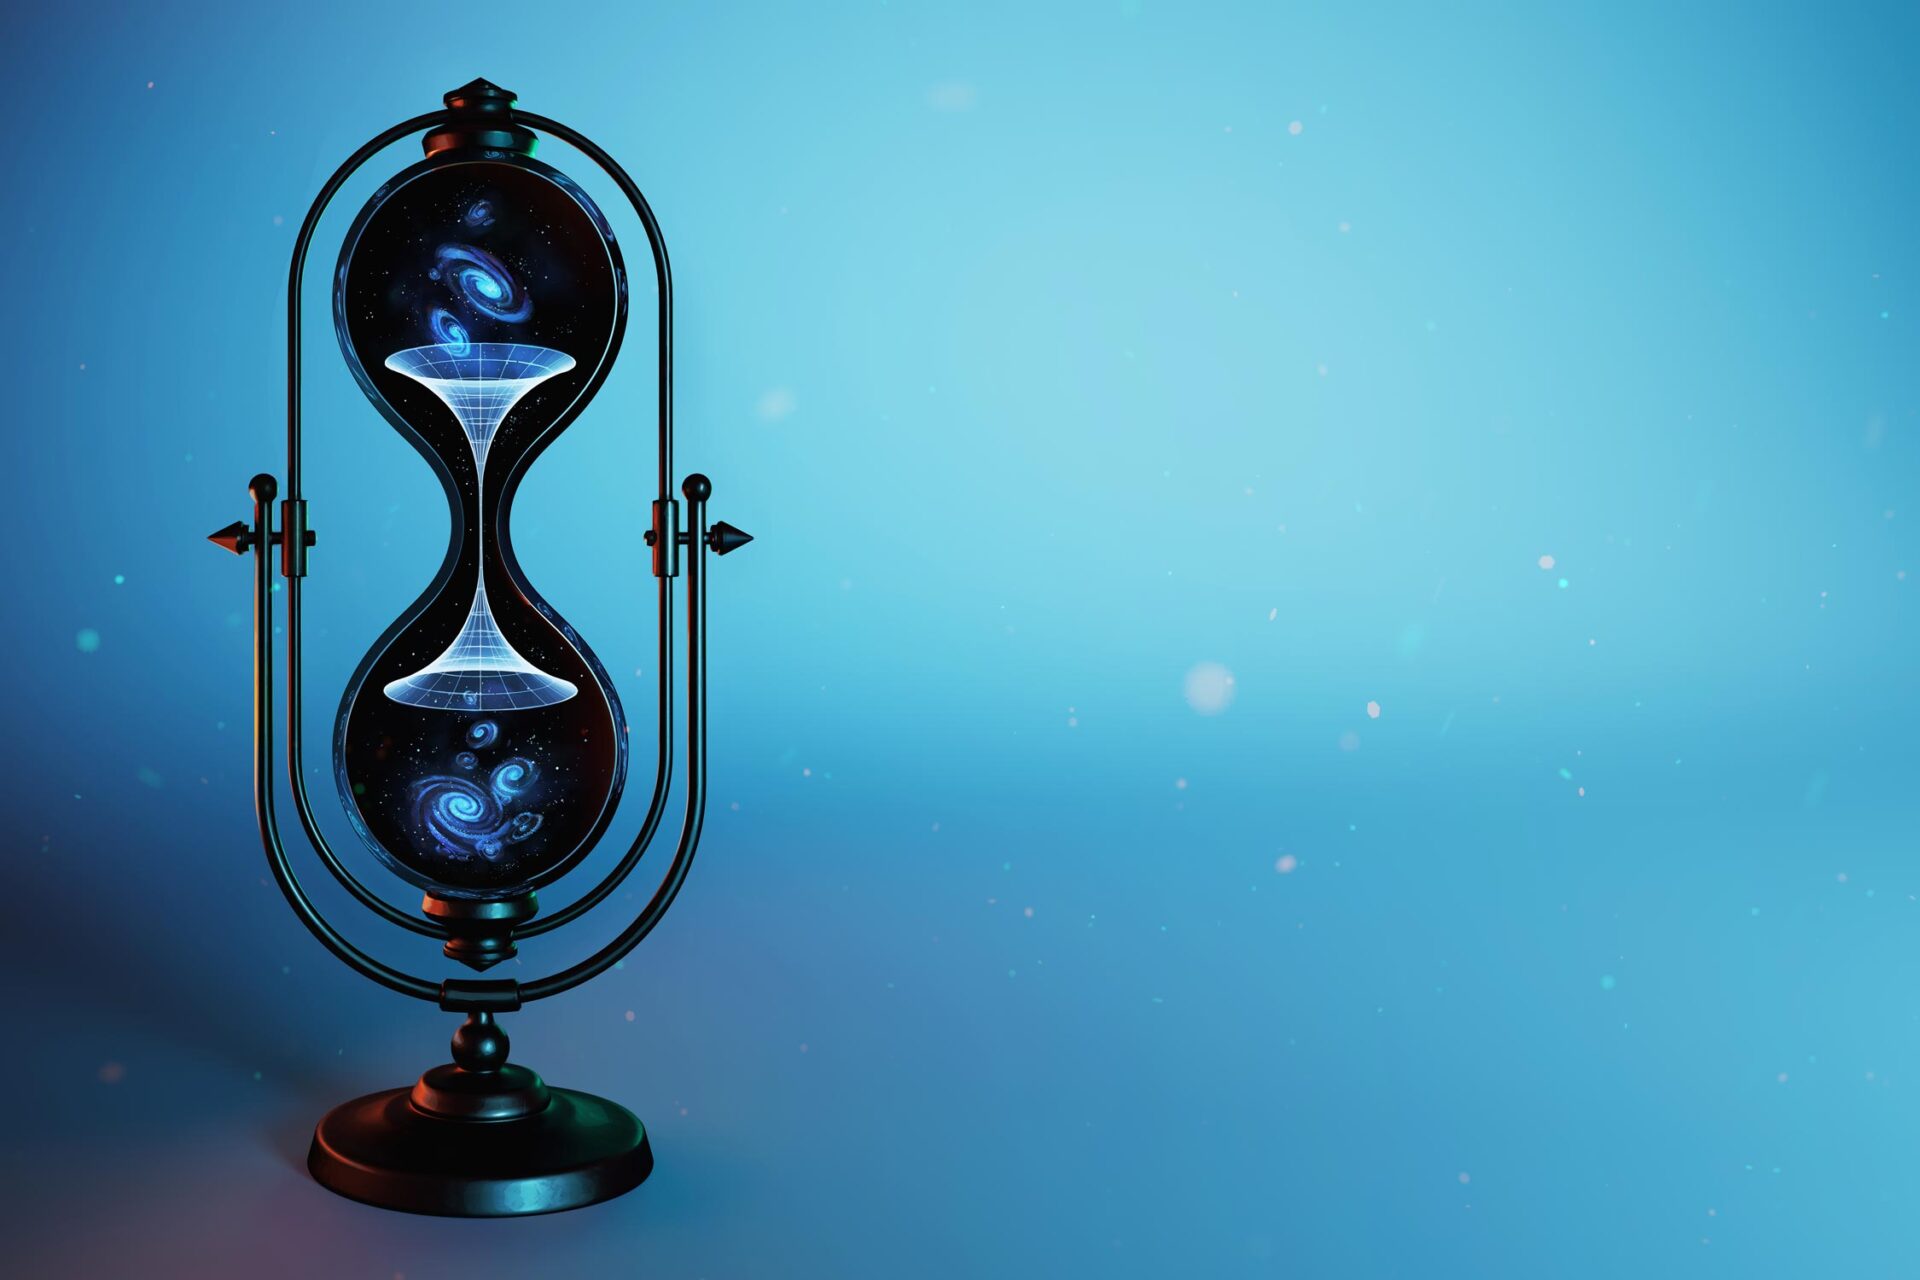 3D art on blue backdrop: A black hourglass containing galaxies that are falling in the top and spilling out the bottom of a white wormhole or two-sided black hole.